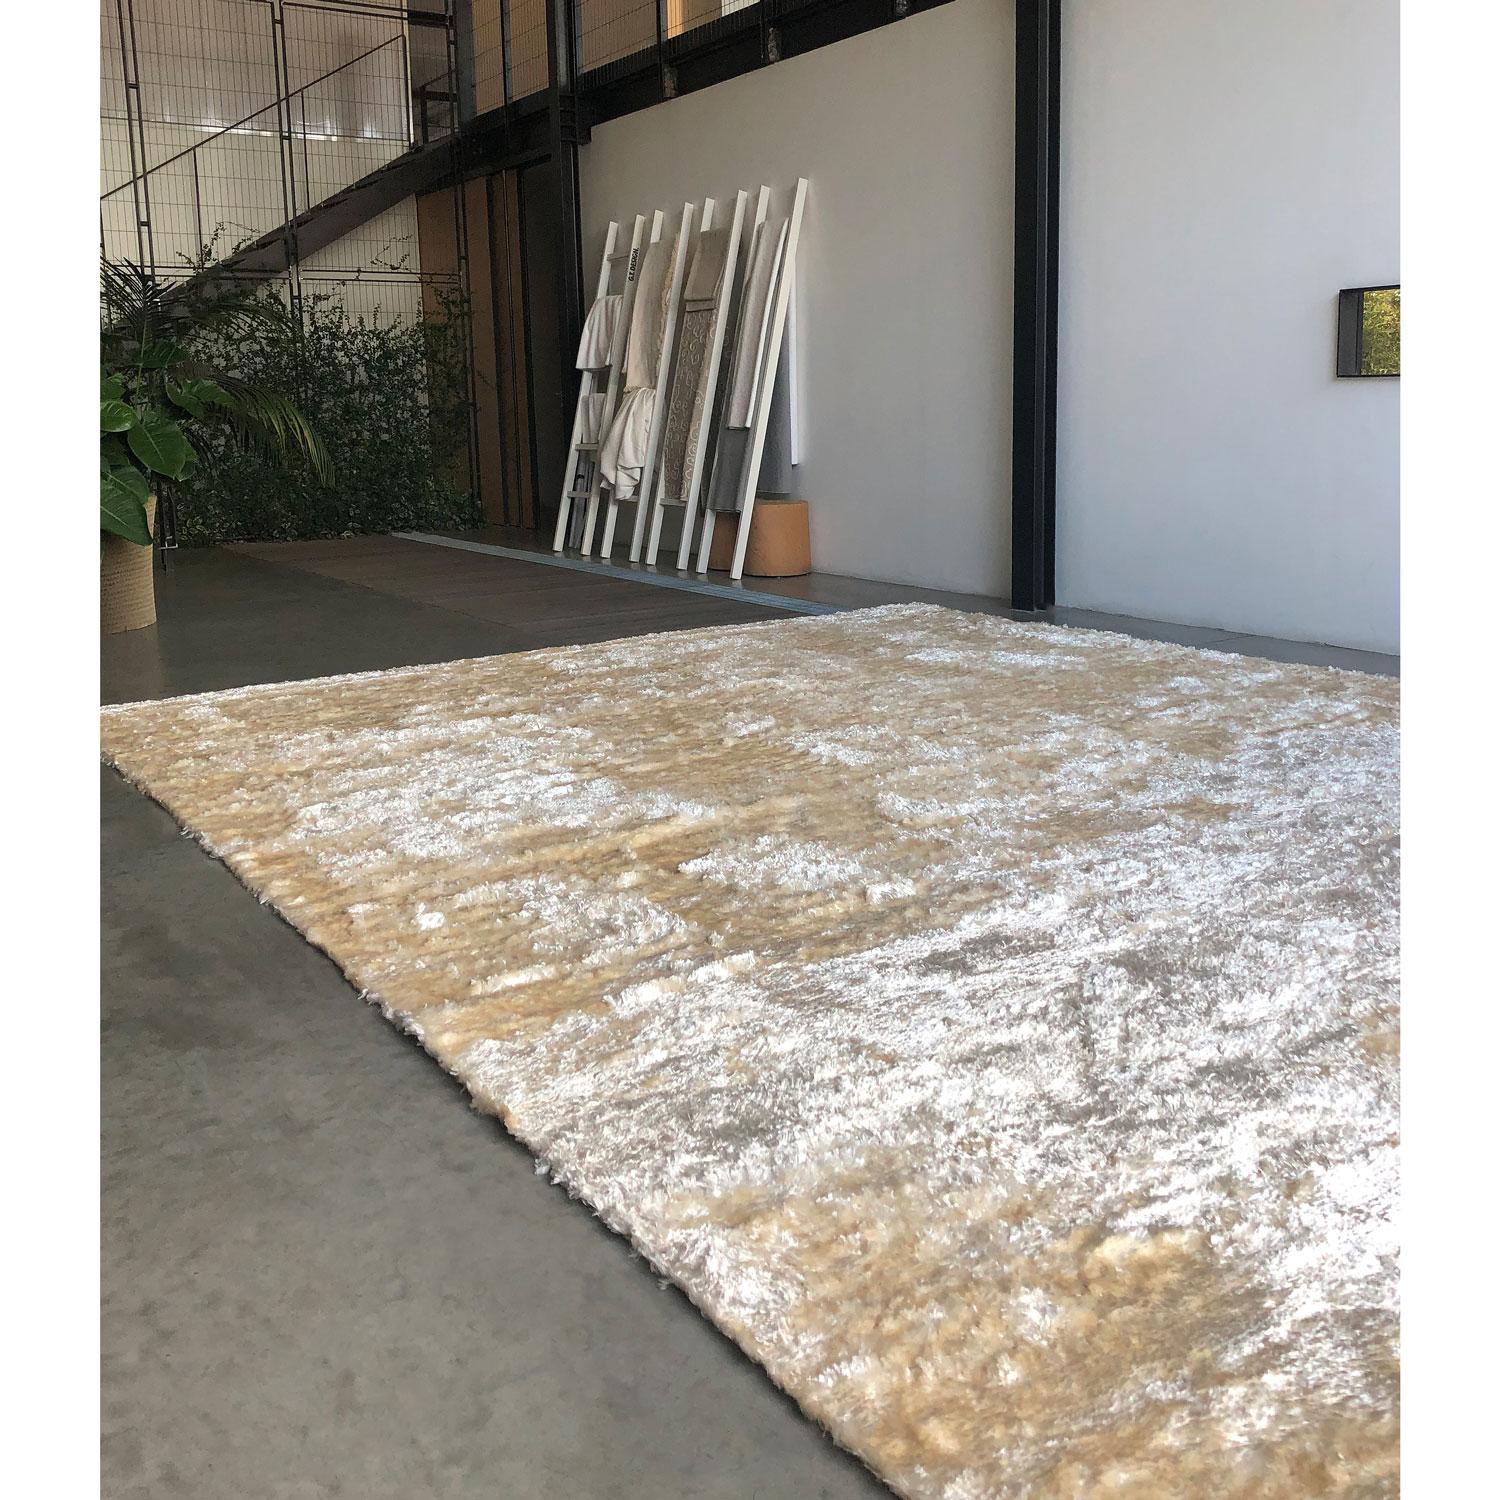 “KamaSu”, in the color “Bianco Luce”, is a bright and ultra-soft contemporary rug by designer Deanna Comellini, founder and creative director of G.T.DESIGN. 
This model features a hand-stitching that brings together two “KamaSu” rugs creating a